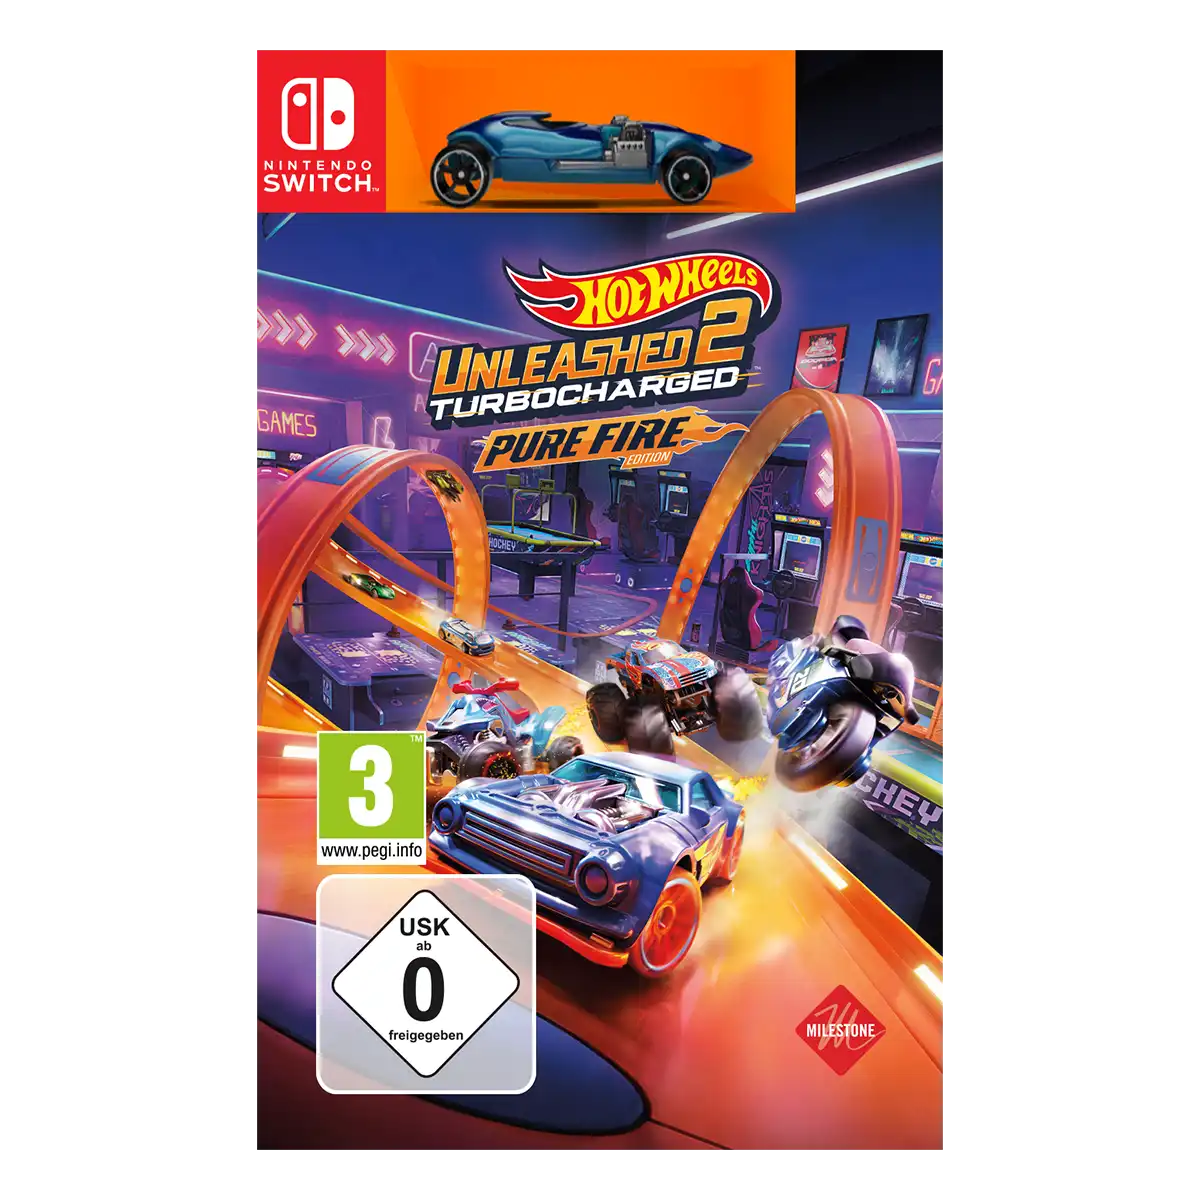 Hot Wheels Unleashed™ 2 Turbocharged Pure Fire Edition (Switch)